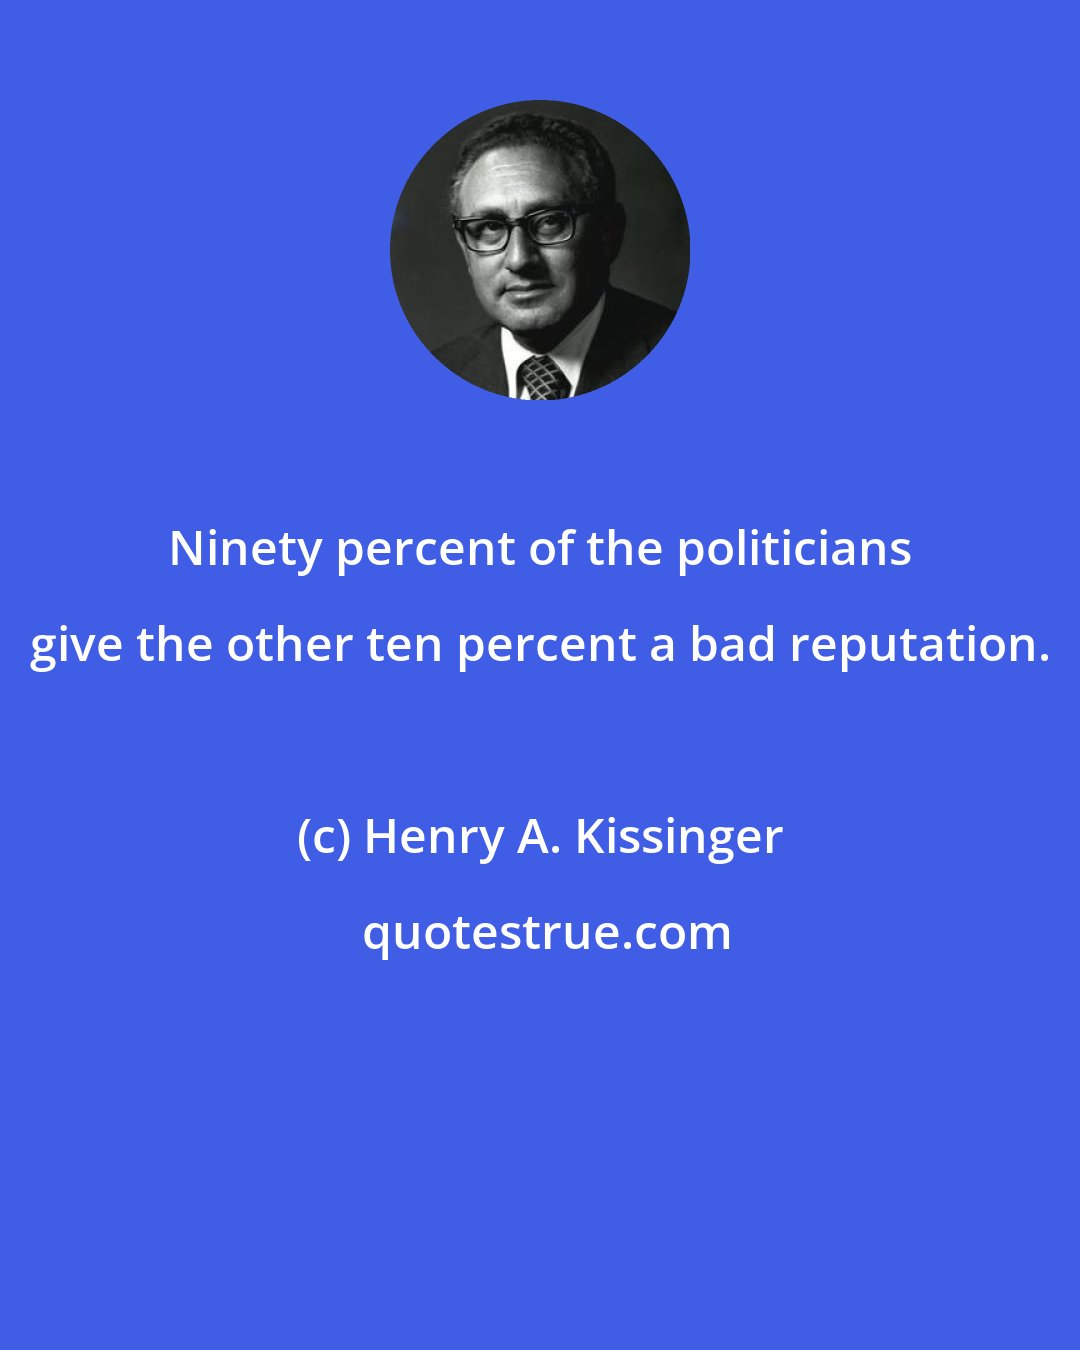 Henry A. Kissinger: Ninety percent of the politicians give the other ten percent a bad reputation.